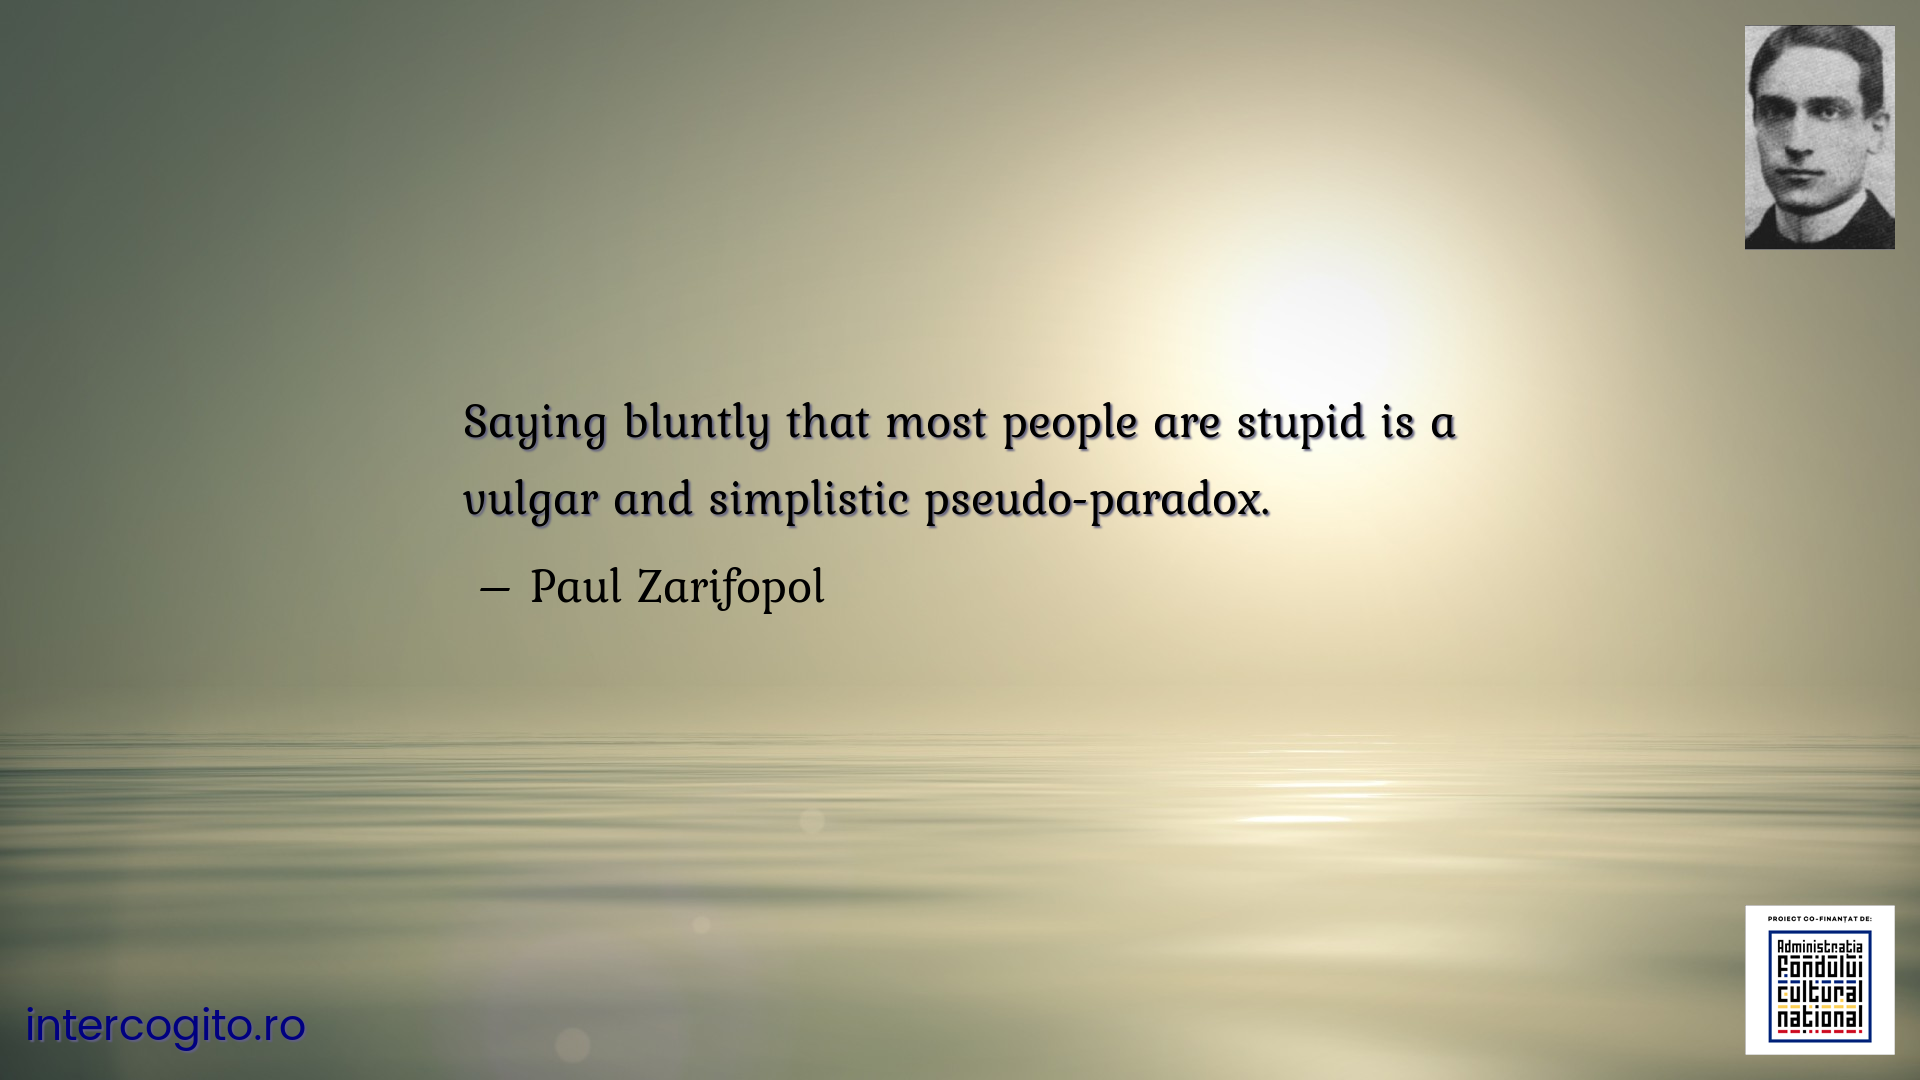 Saying bluntly that most people are stupid is a vulgar and simplistic pseudo-paradox.